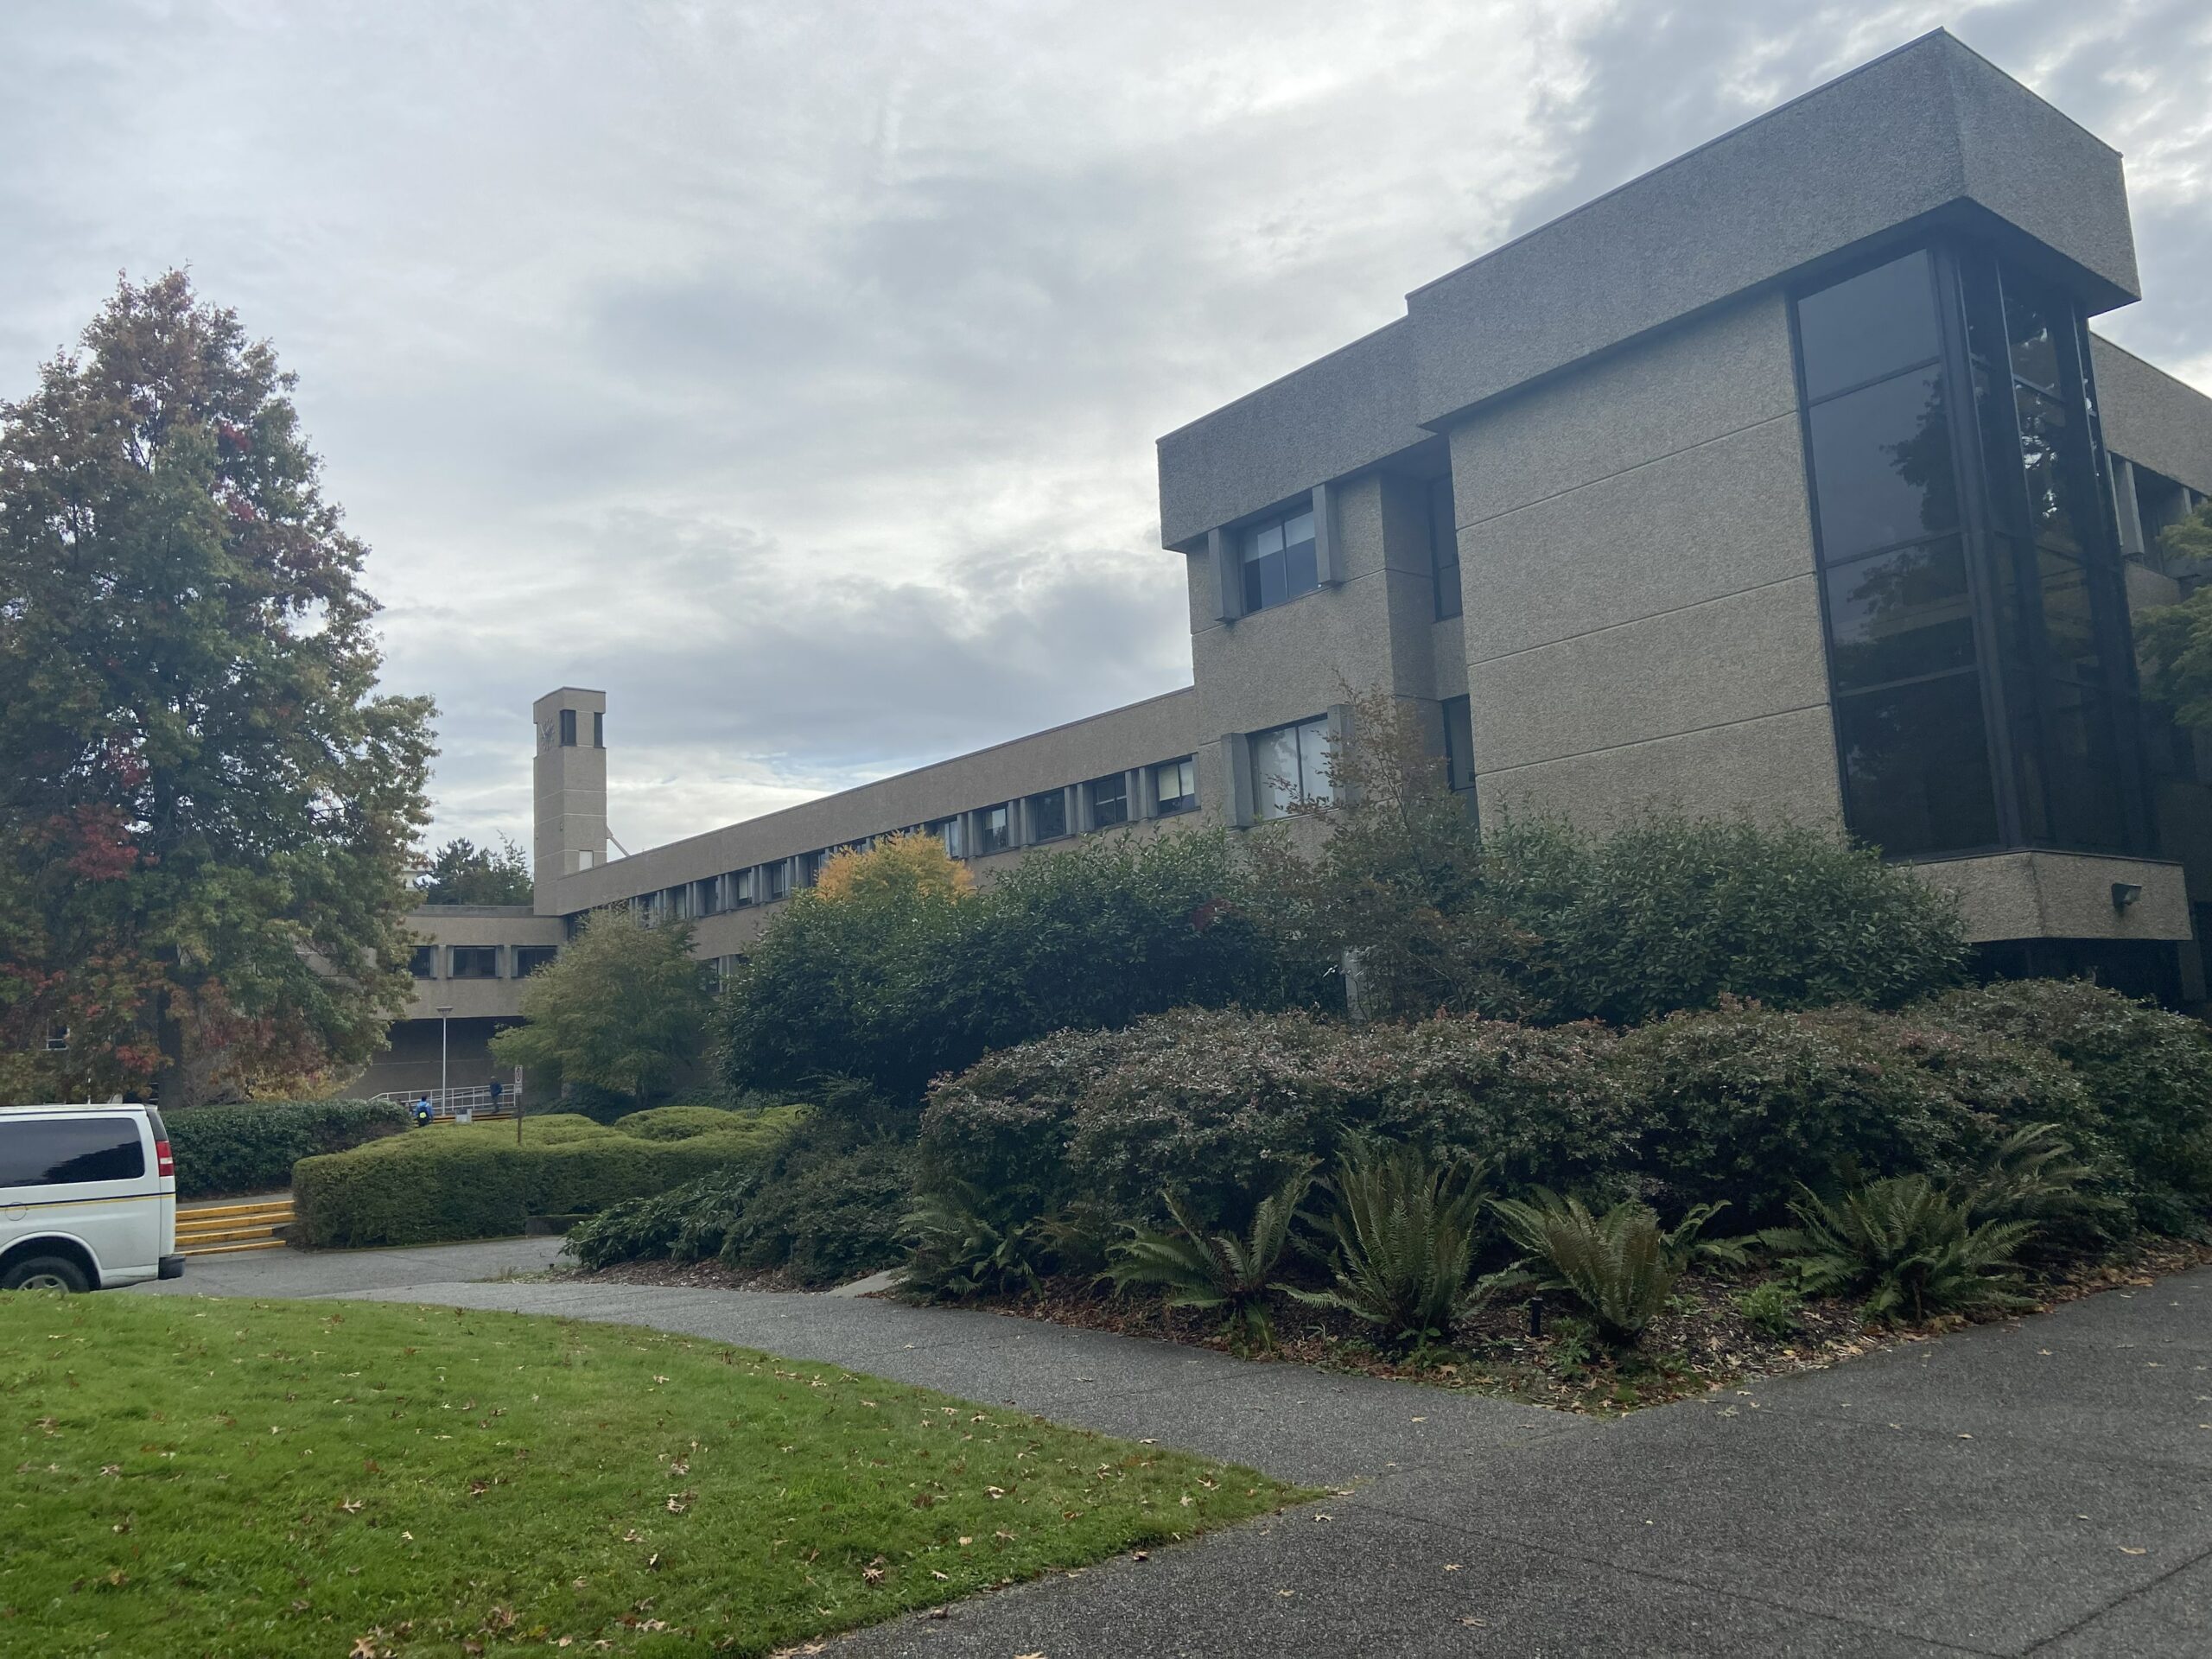 Professor uses racial slur in class and prompts UVic  apology, student demands for more action